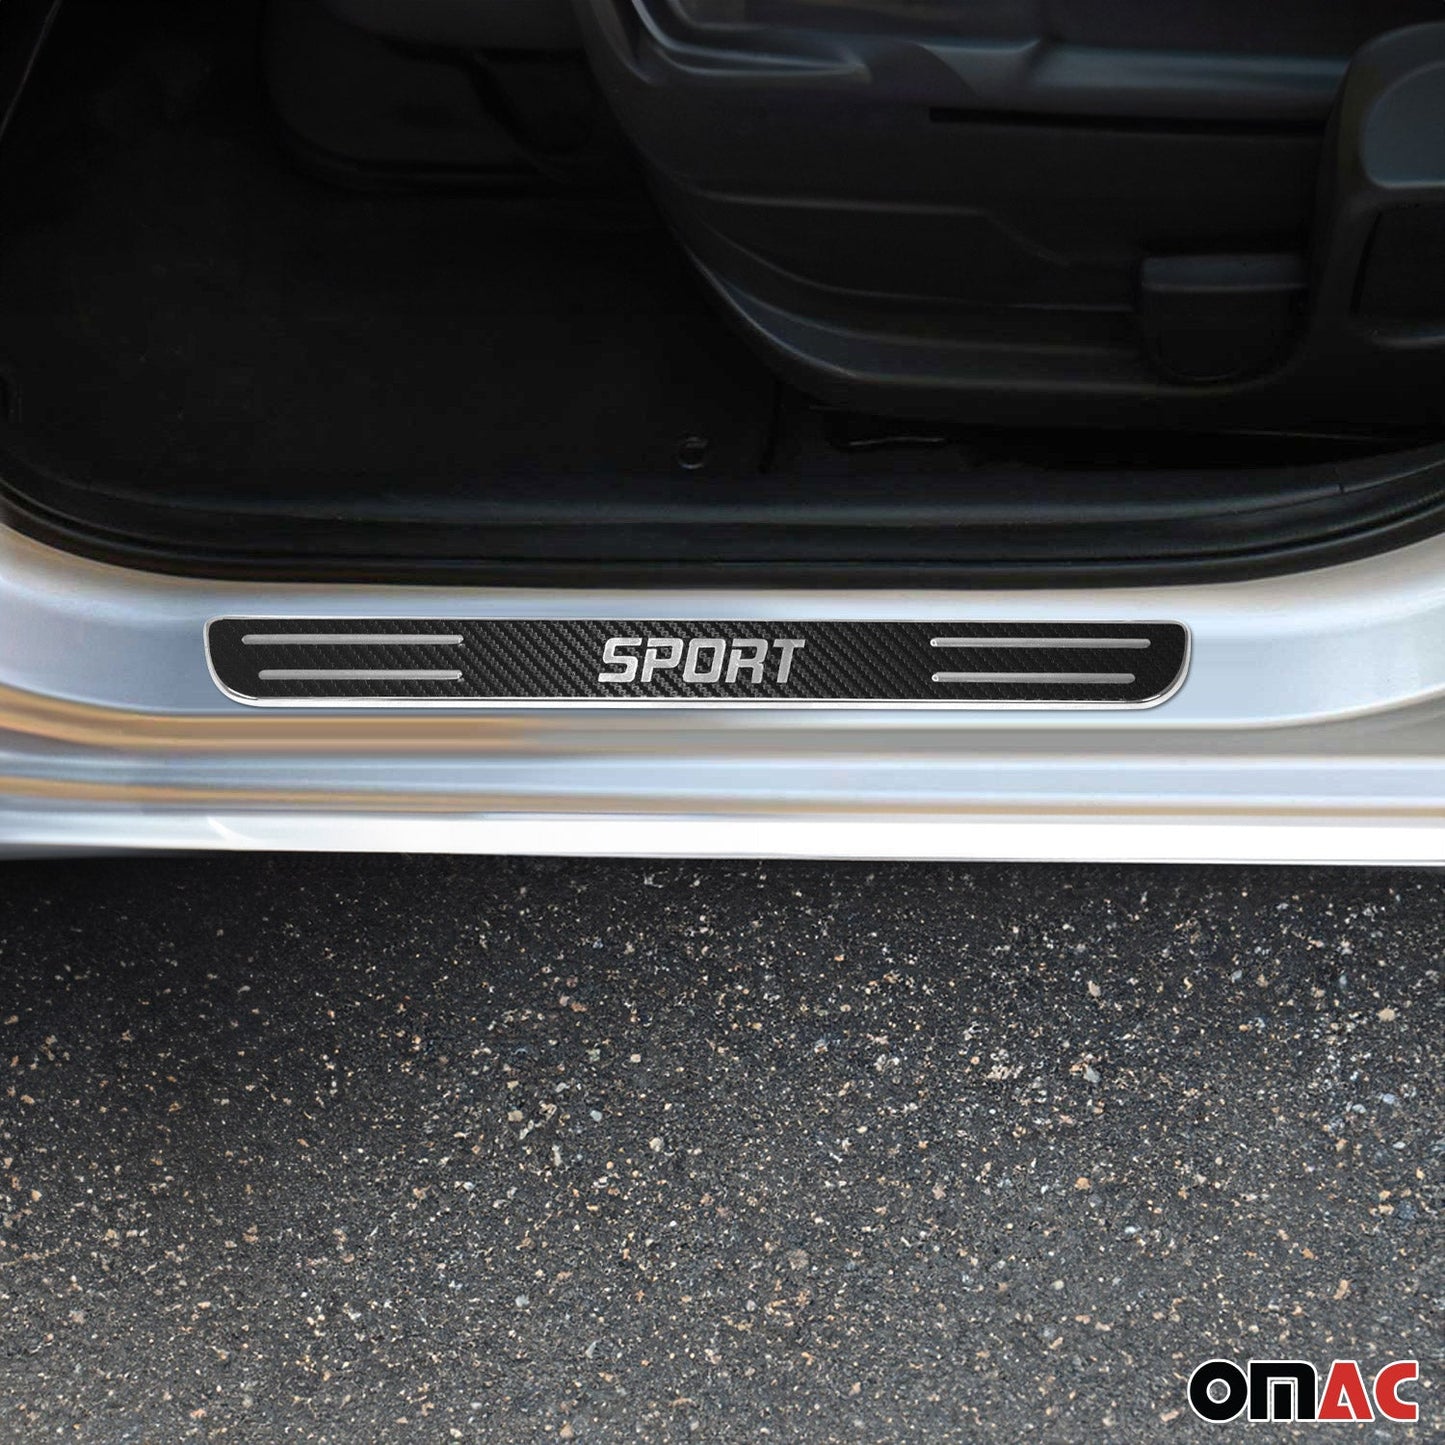 OMAC Door Sill Scuff Plate Scratch Protector for Dodge Ram Sport Steel Carbon Foiled U016936